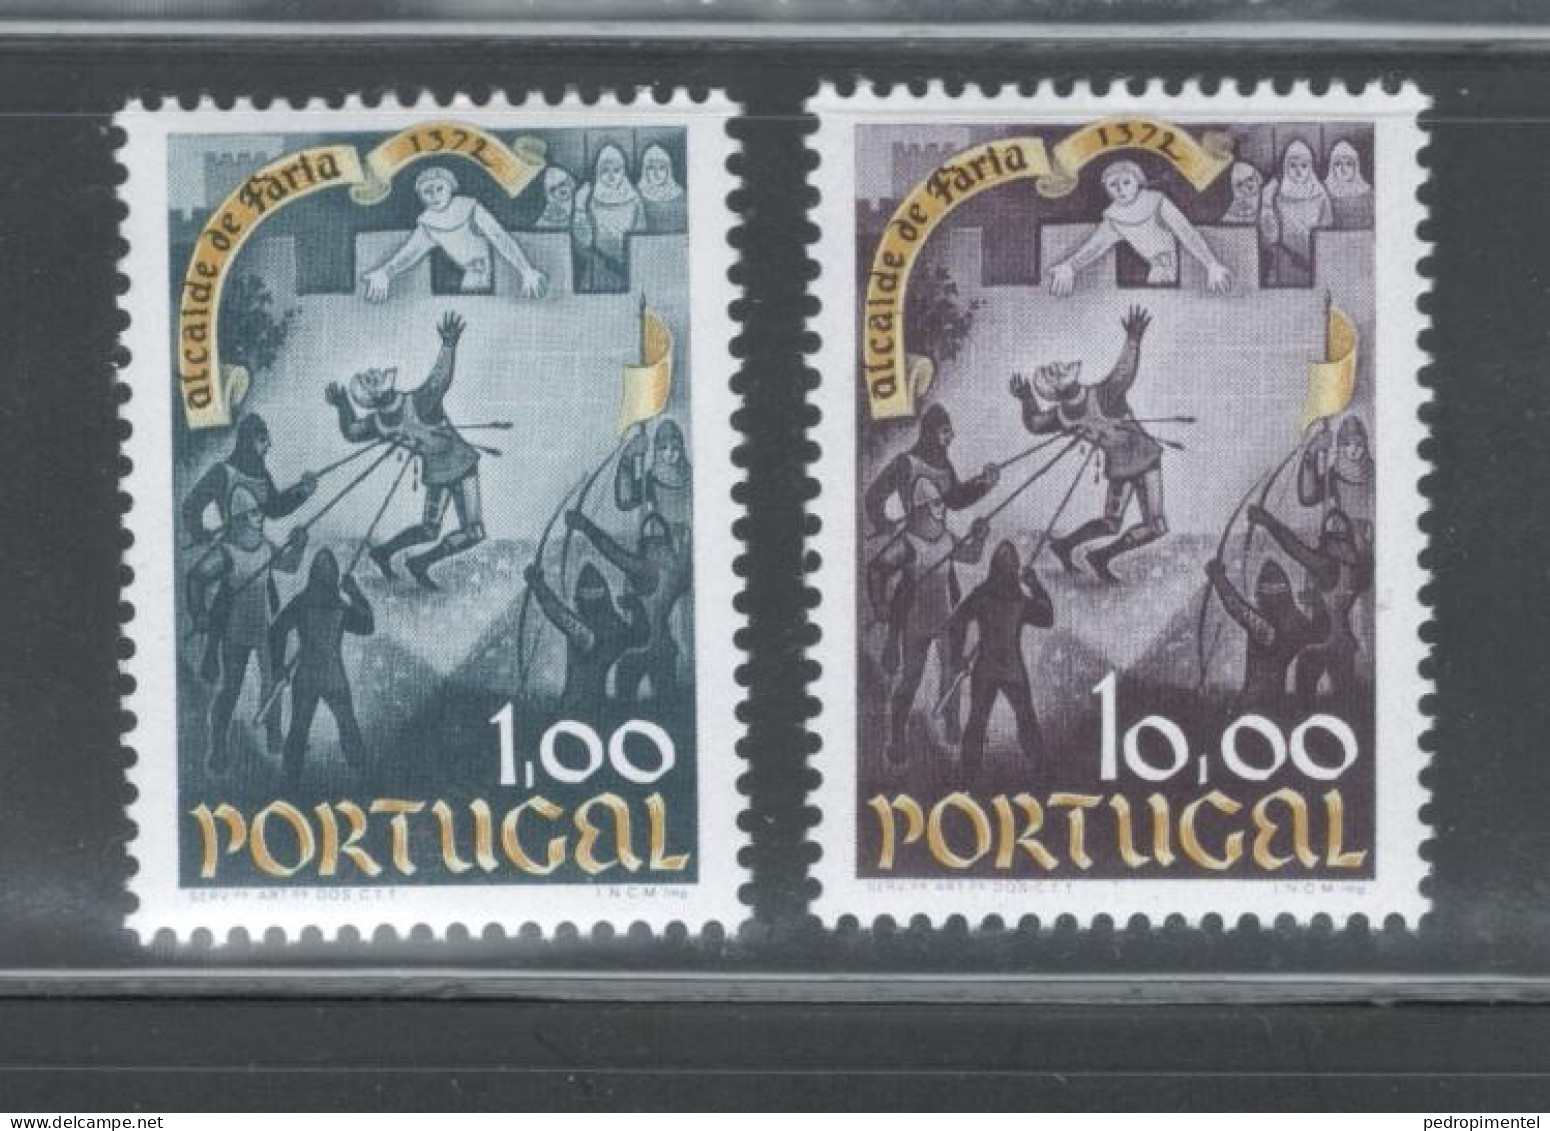 Portugal Stamps 1973 "Courage Goncalves Faria" Condition MNH #1204-1205 - Unused Stamps